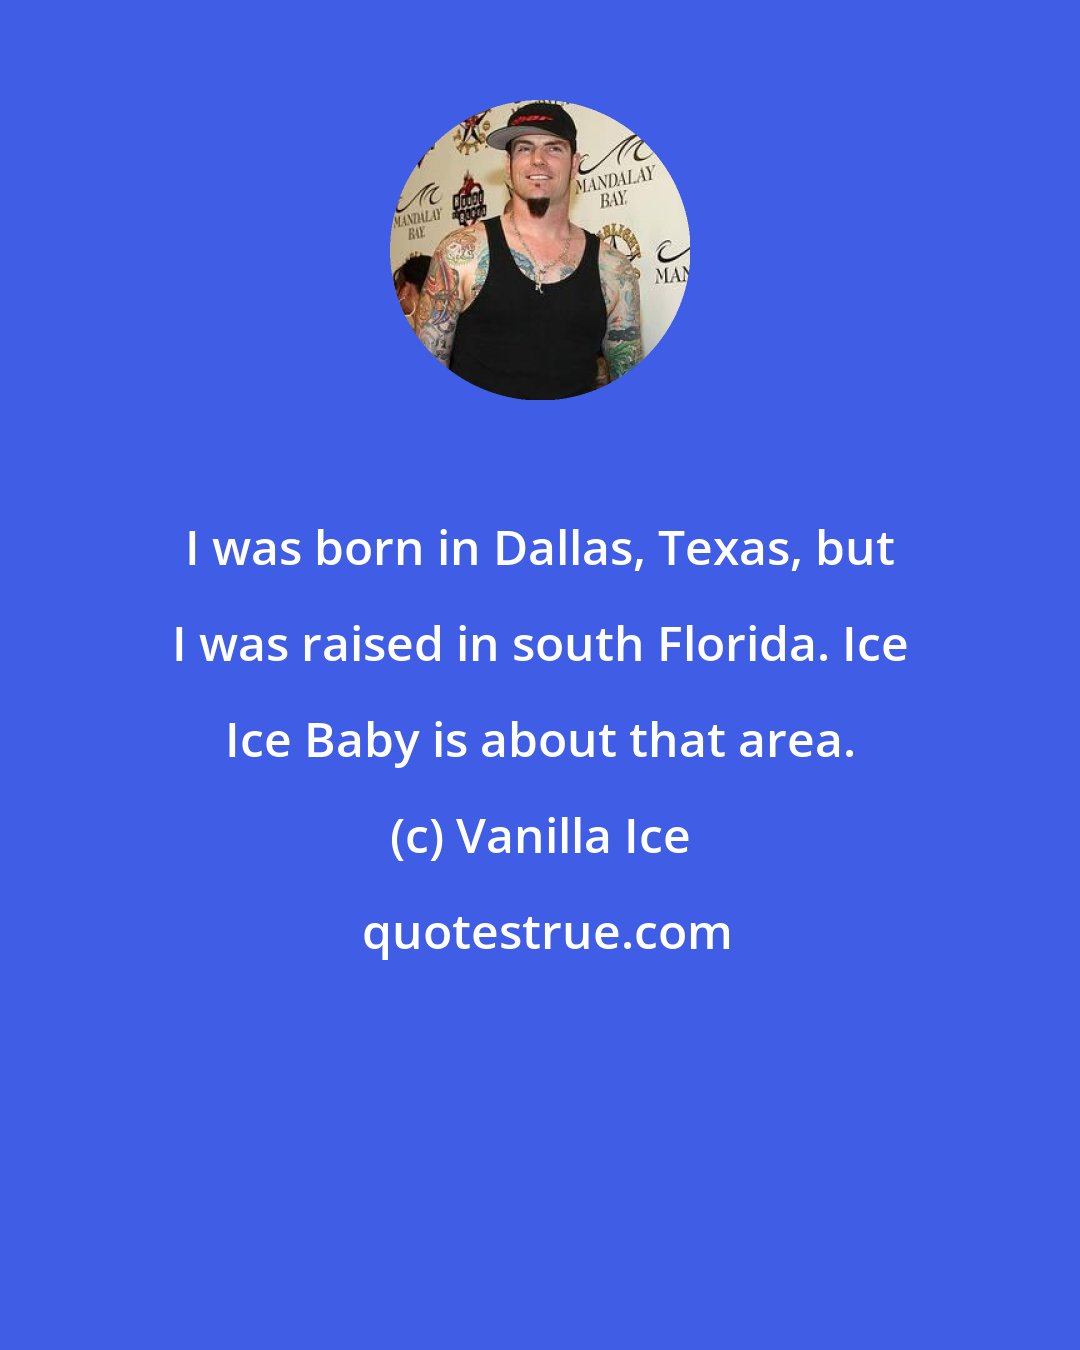 Vanilla Ice: I was born in Dallas, Texas, but I was raised in south Florida. Ice Ice Baby is about that area.